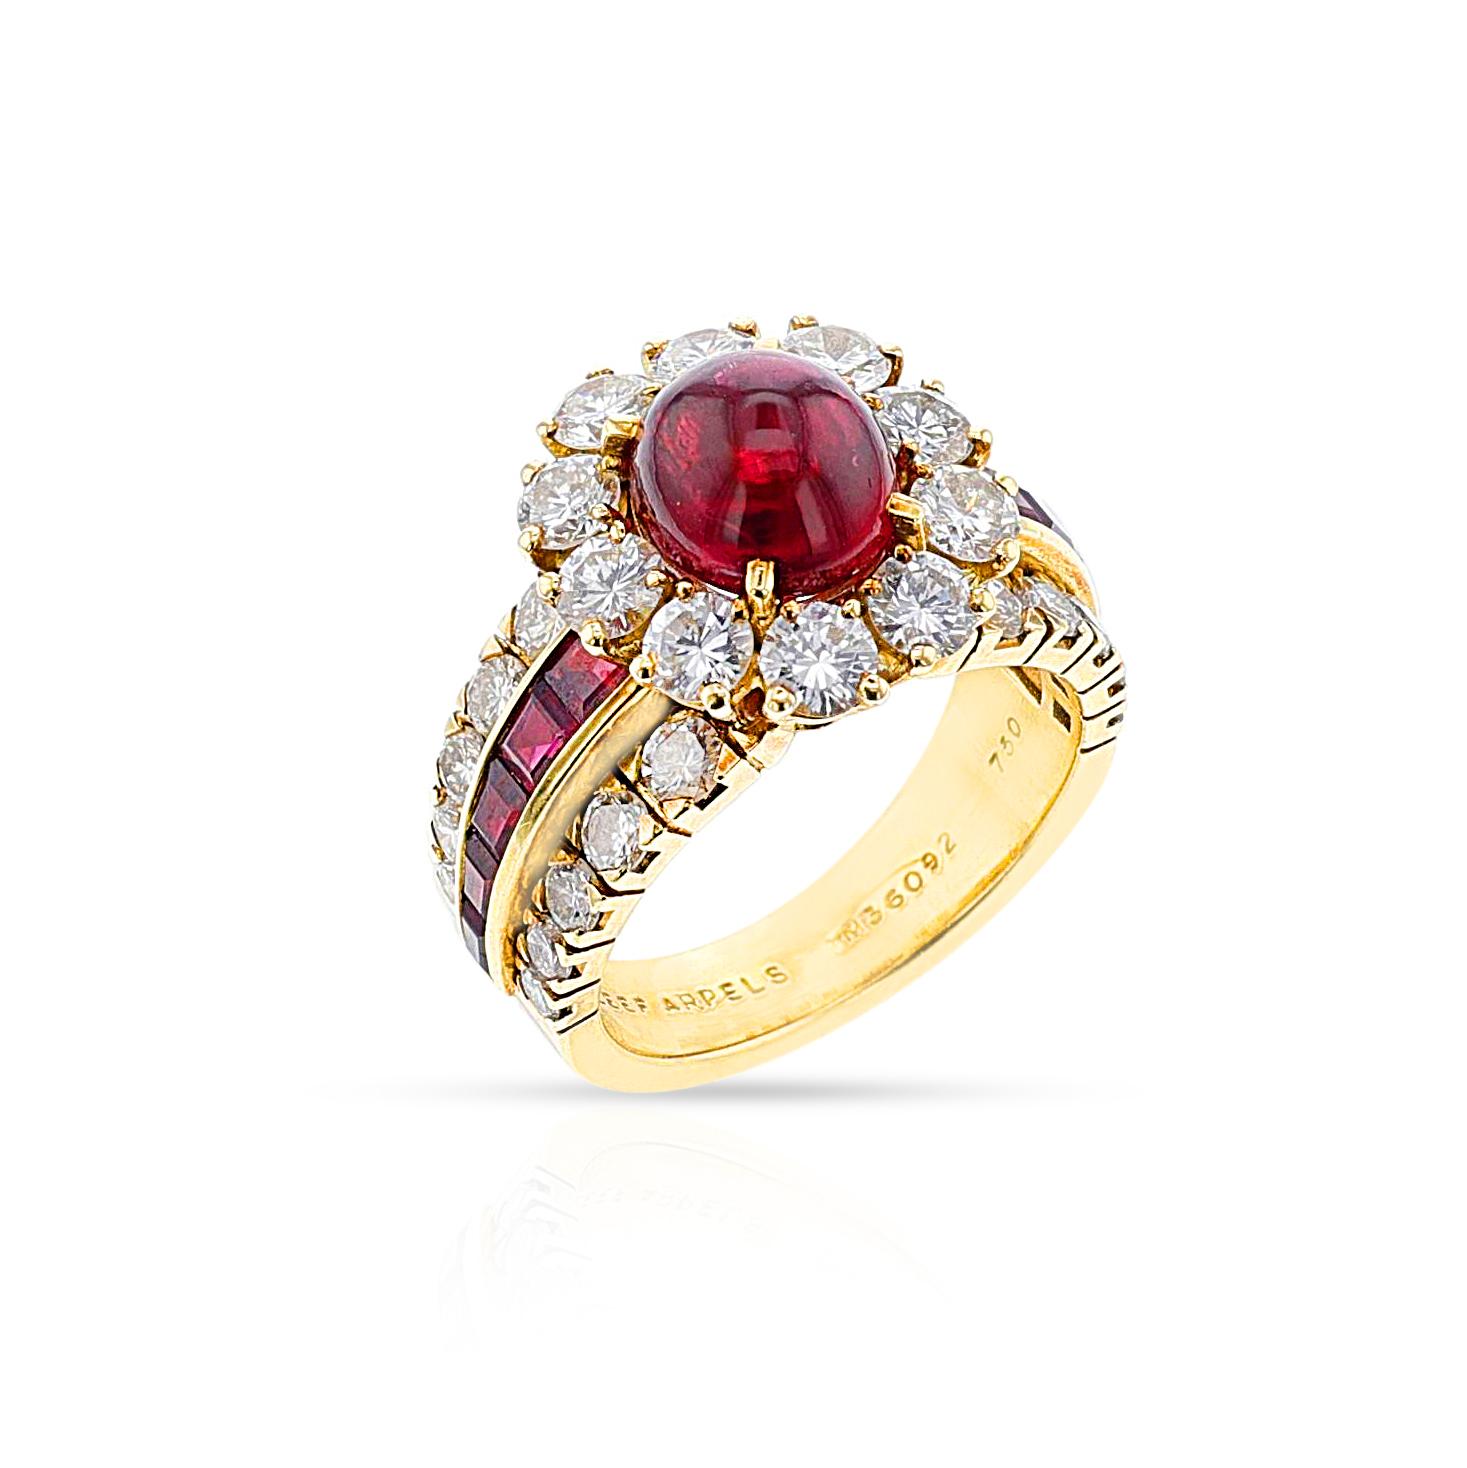 Van Cleef & Arpels Ruby Cabochon and Diamond Ring, 18k In Excellent Condition For Sale In New York, NY